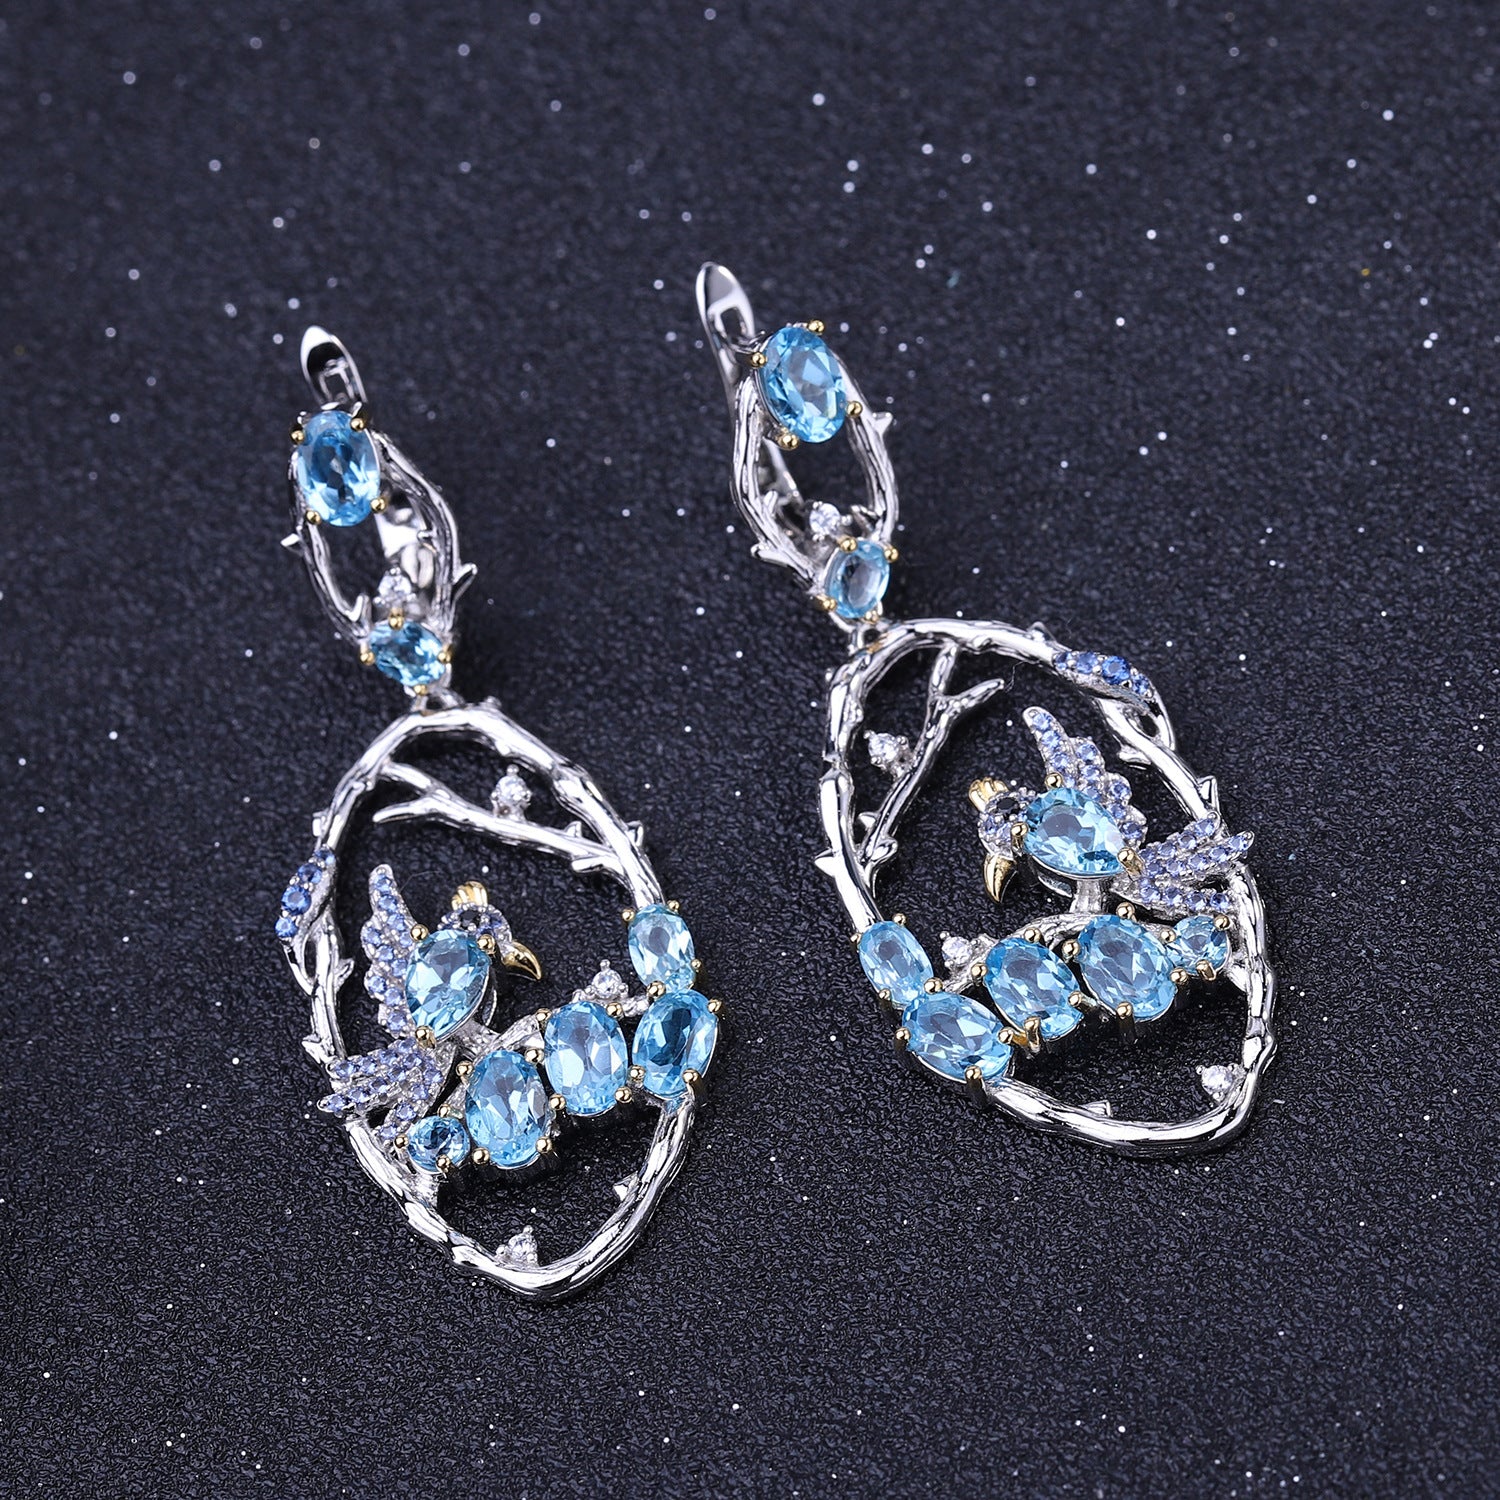 Birds Design Chinese Style 925 Silver Natural Gemstone Drop Earrings for Women